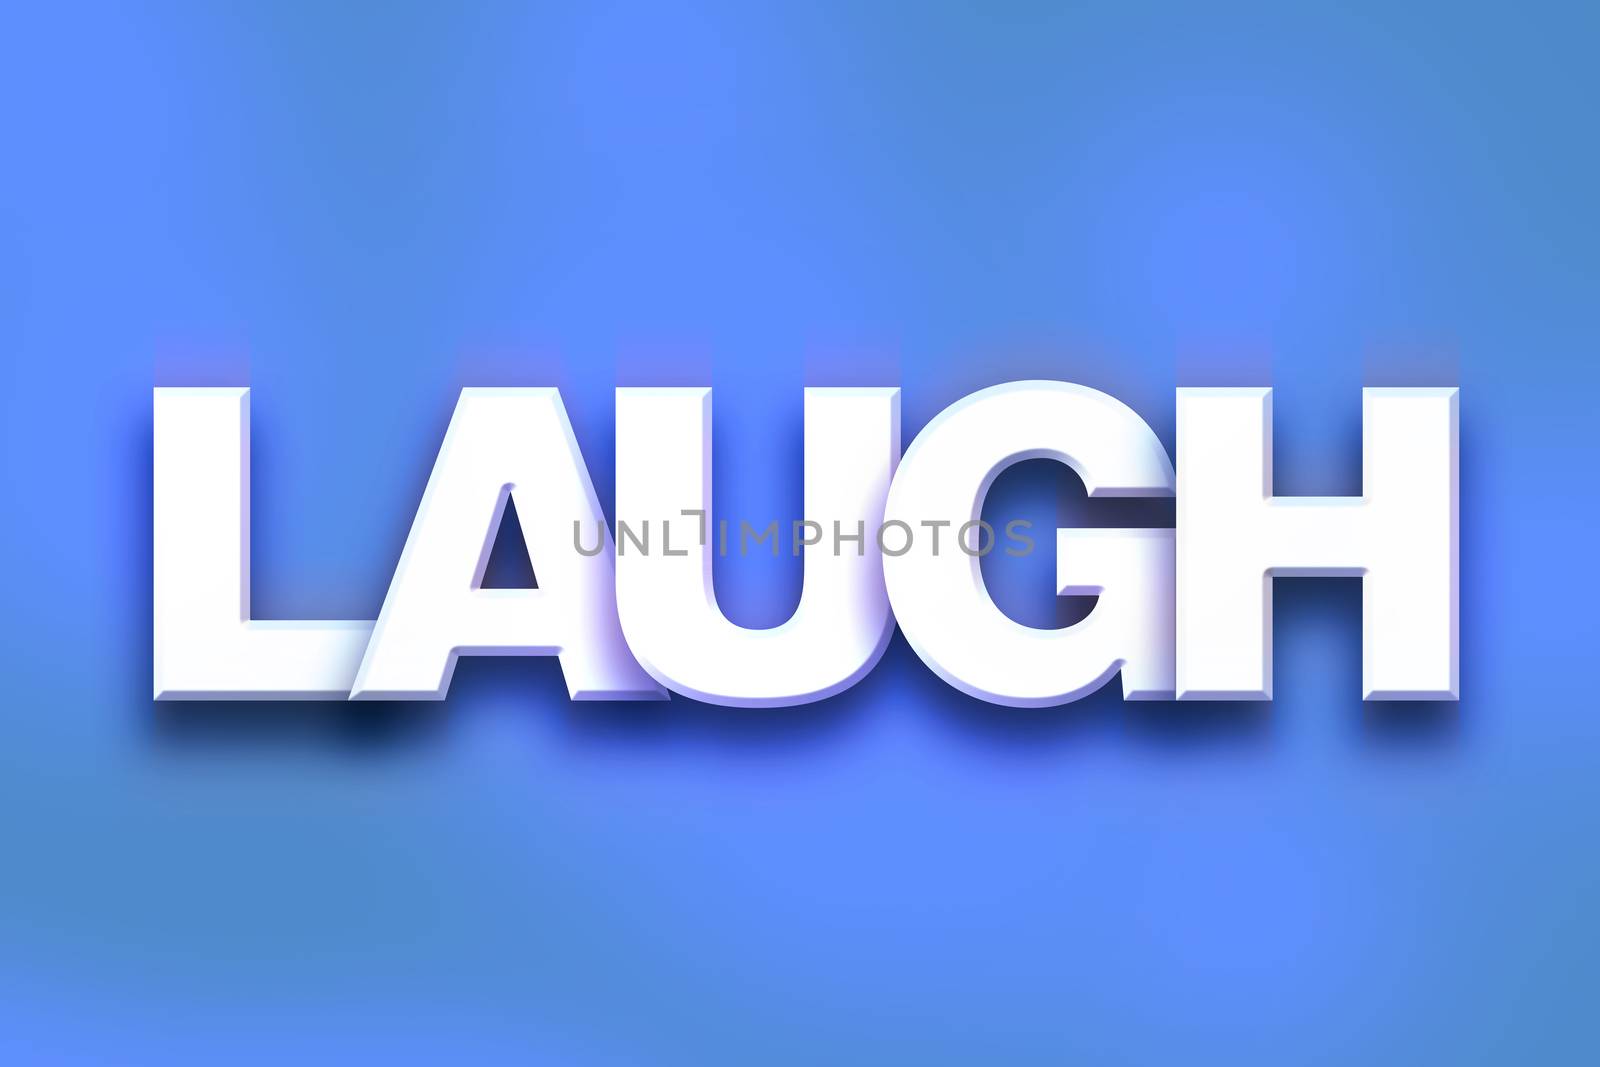 The word "Laugh" written in white 3D letters on a colorful background concept and theme.